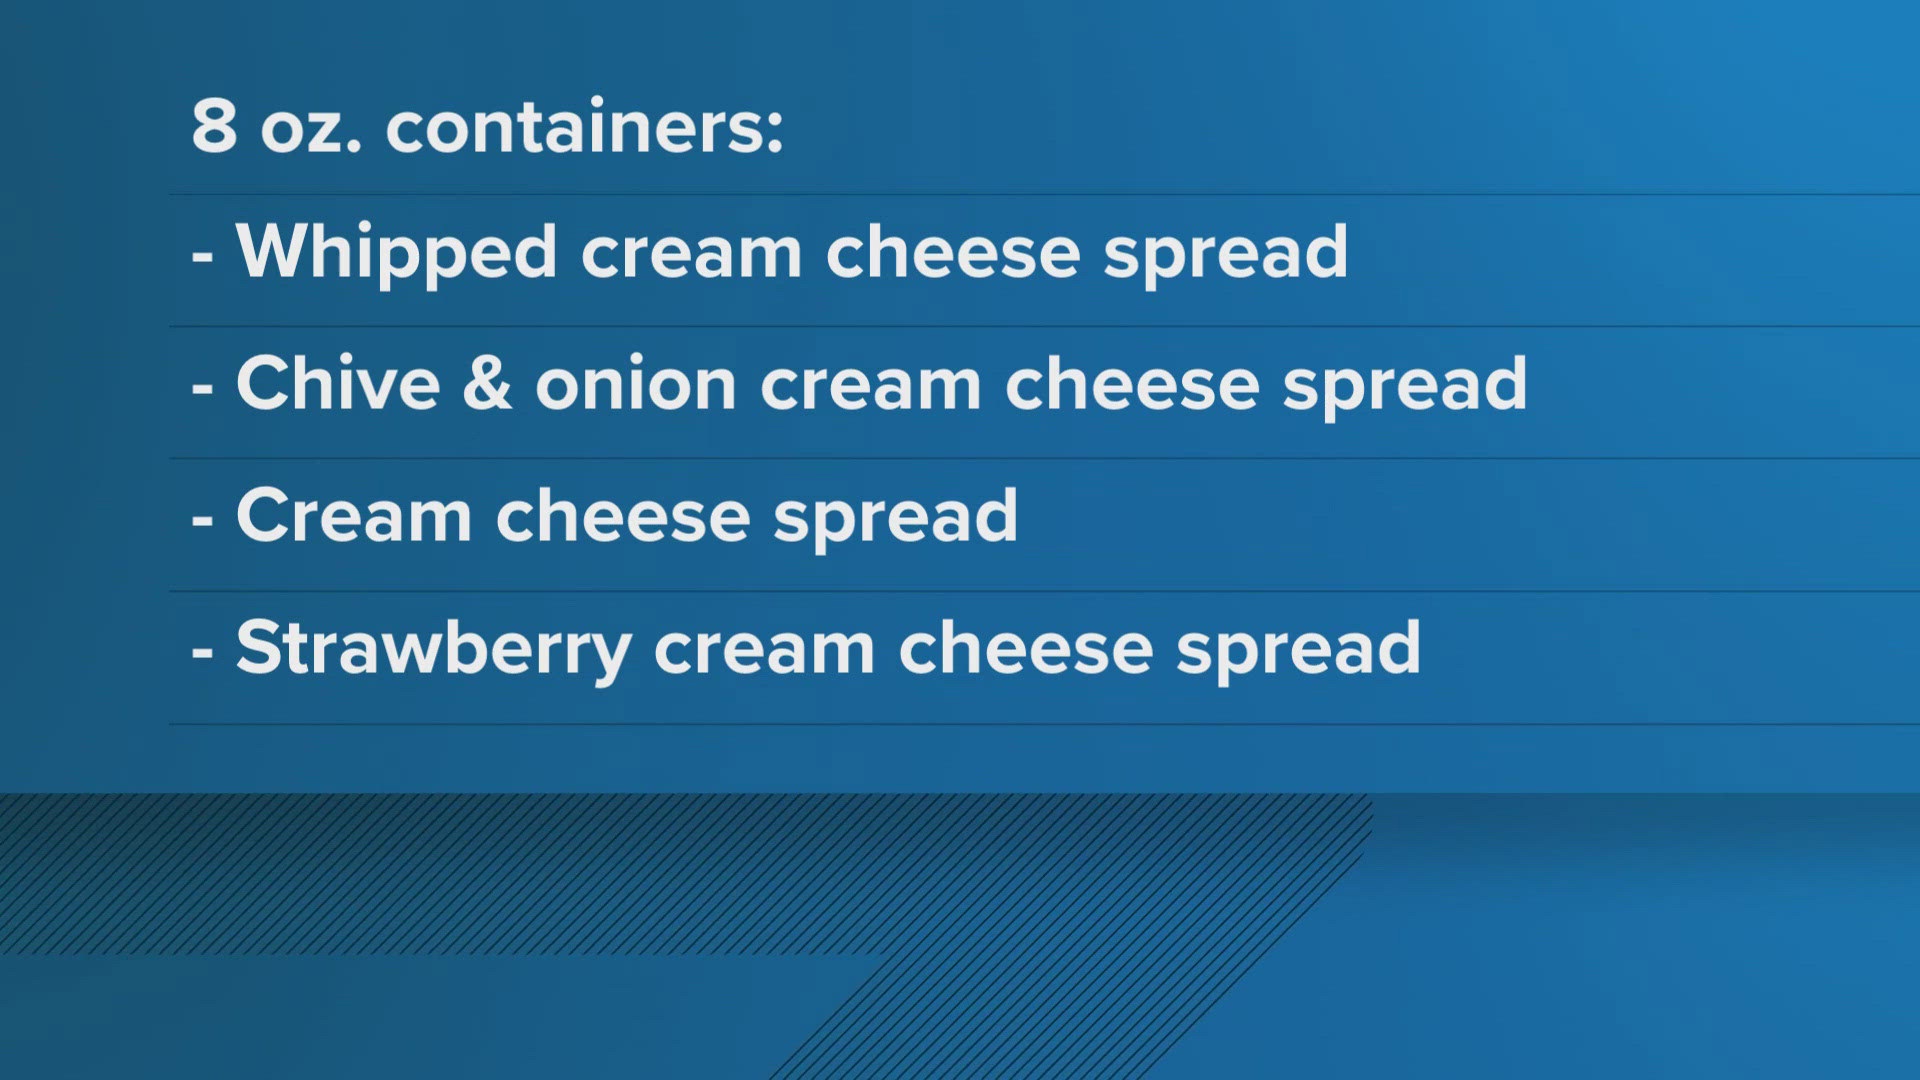 Aldi says four varieties of cream cheese may have been contaminated with salmonella by a third-party supplier.